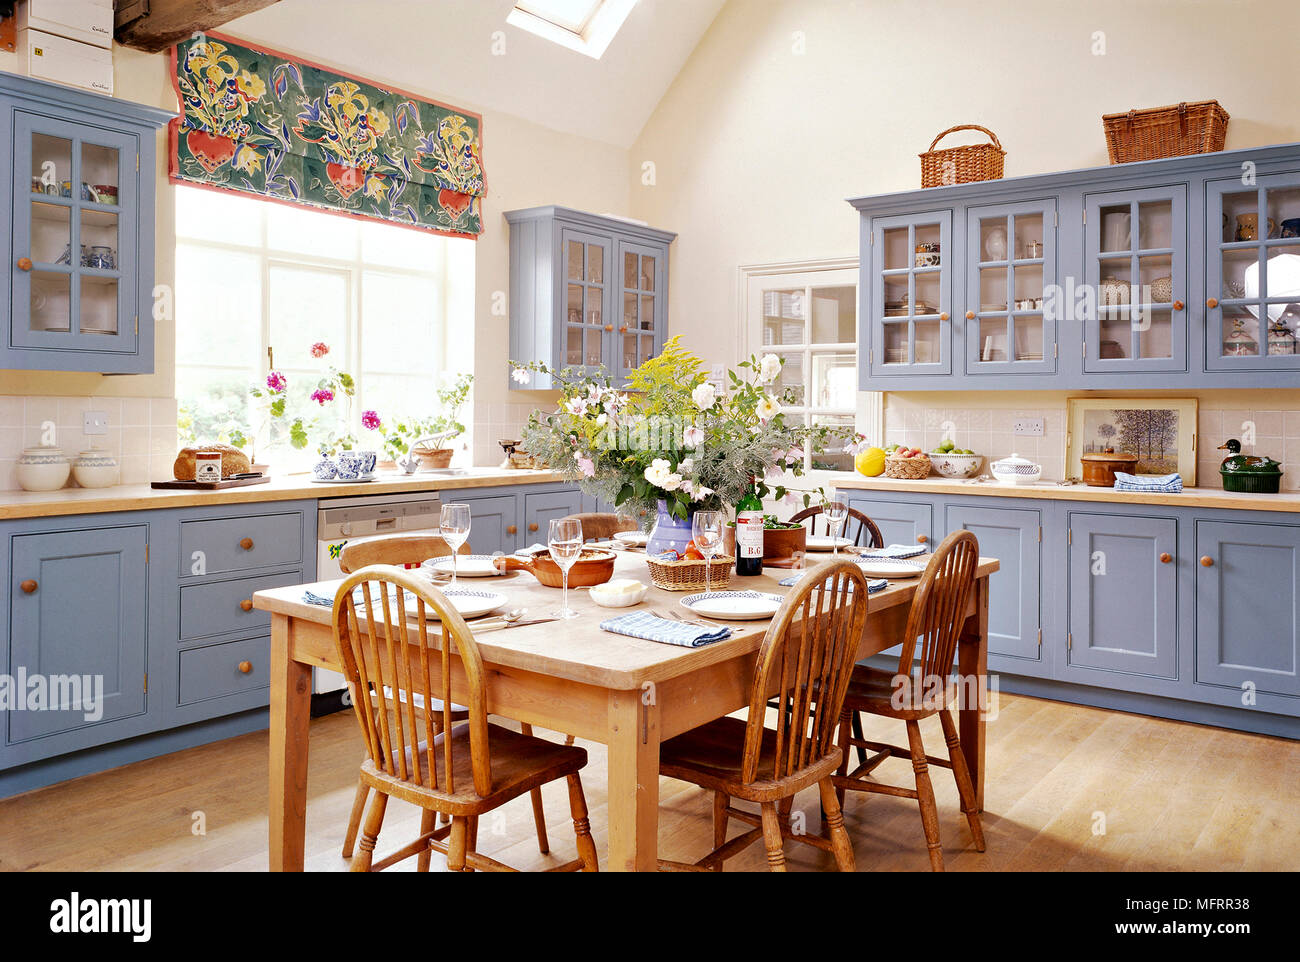 A country kitchen with blue cupboards, wooden table and chairs, wooden floor, set table, flower arrangement, Stock Photo